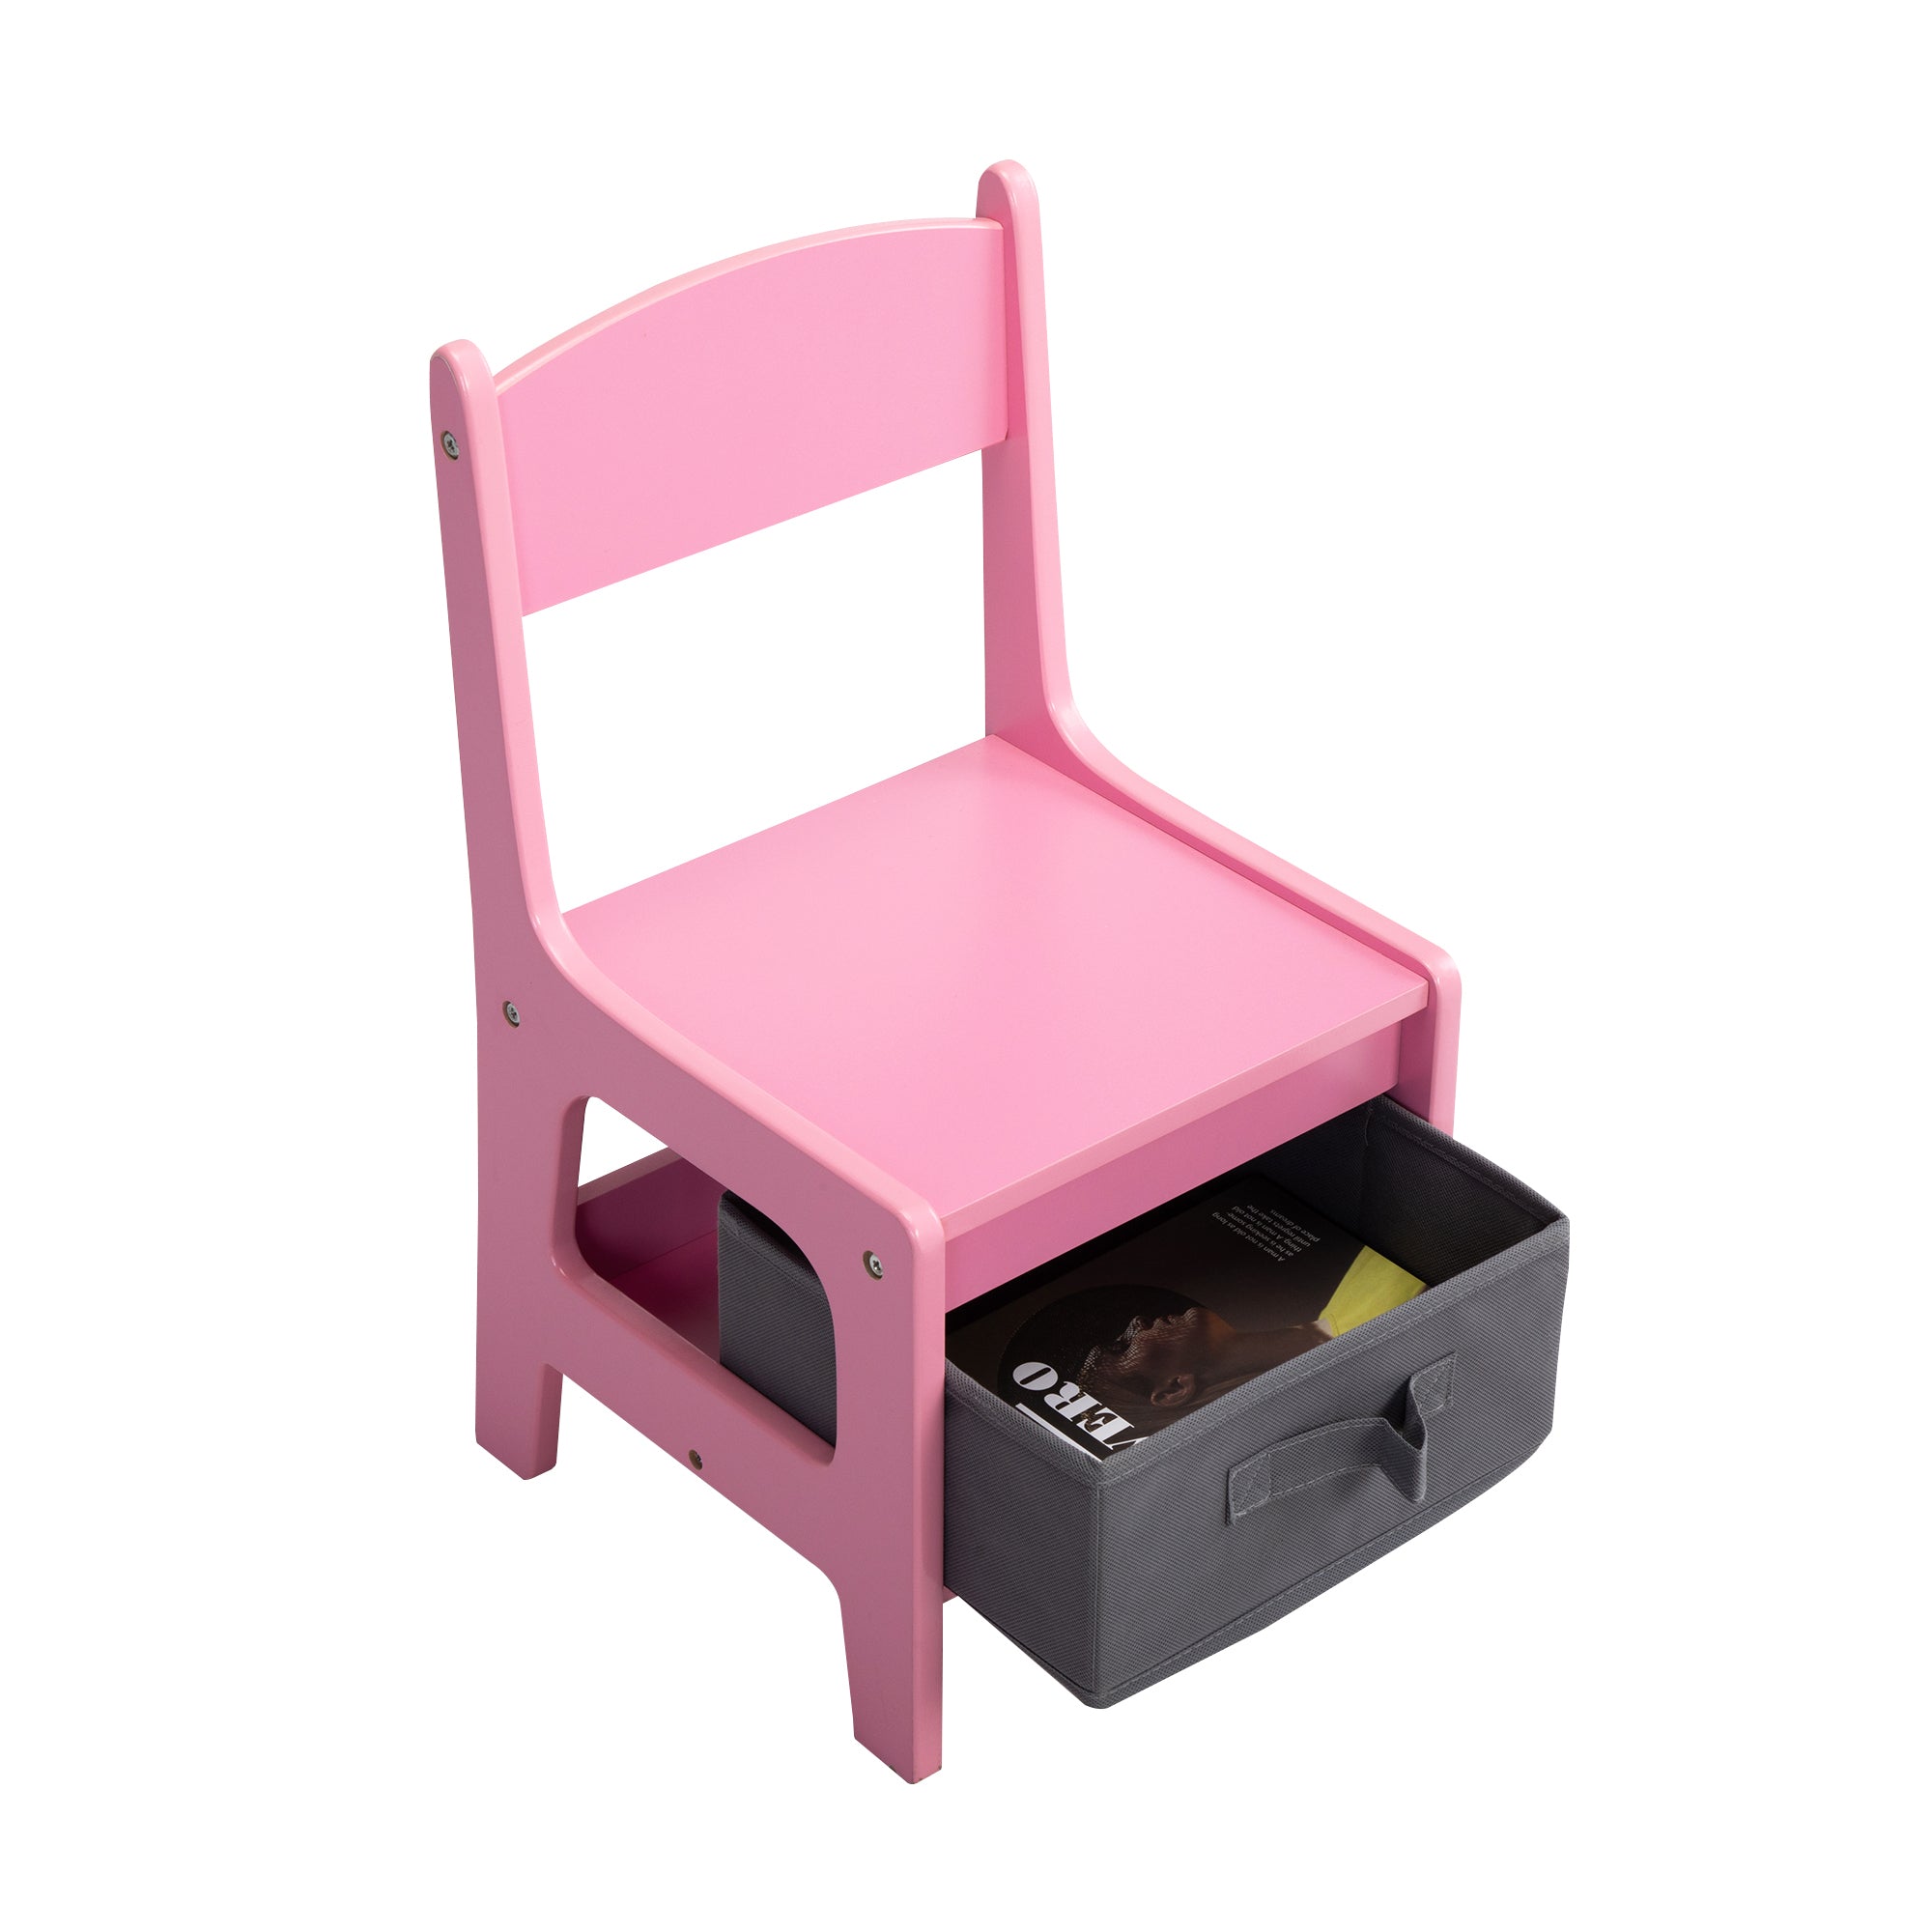 Pink & Gray 3-in-1 Kids Wood Table and 2 Chairs